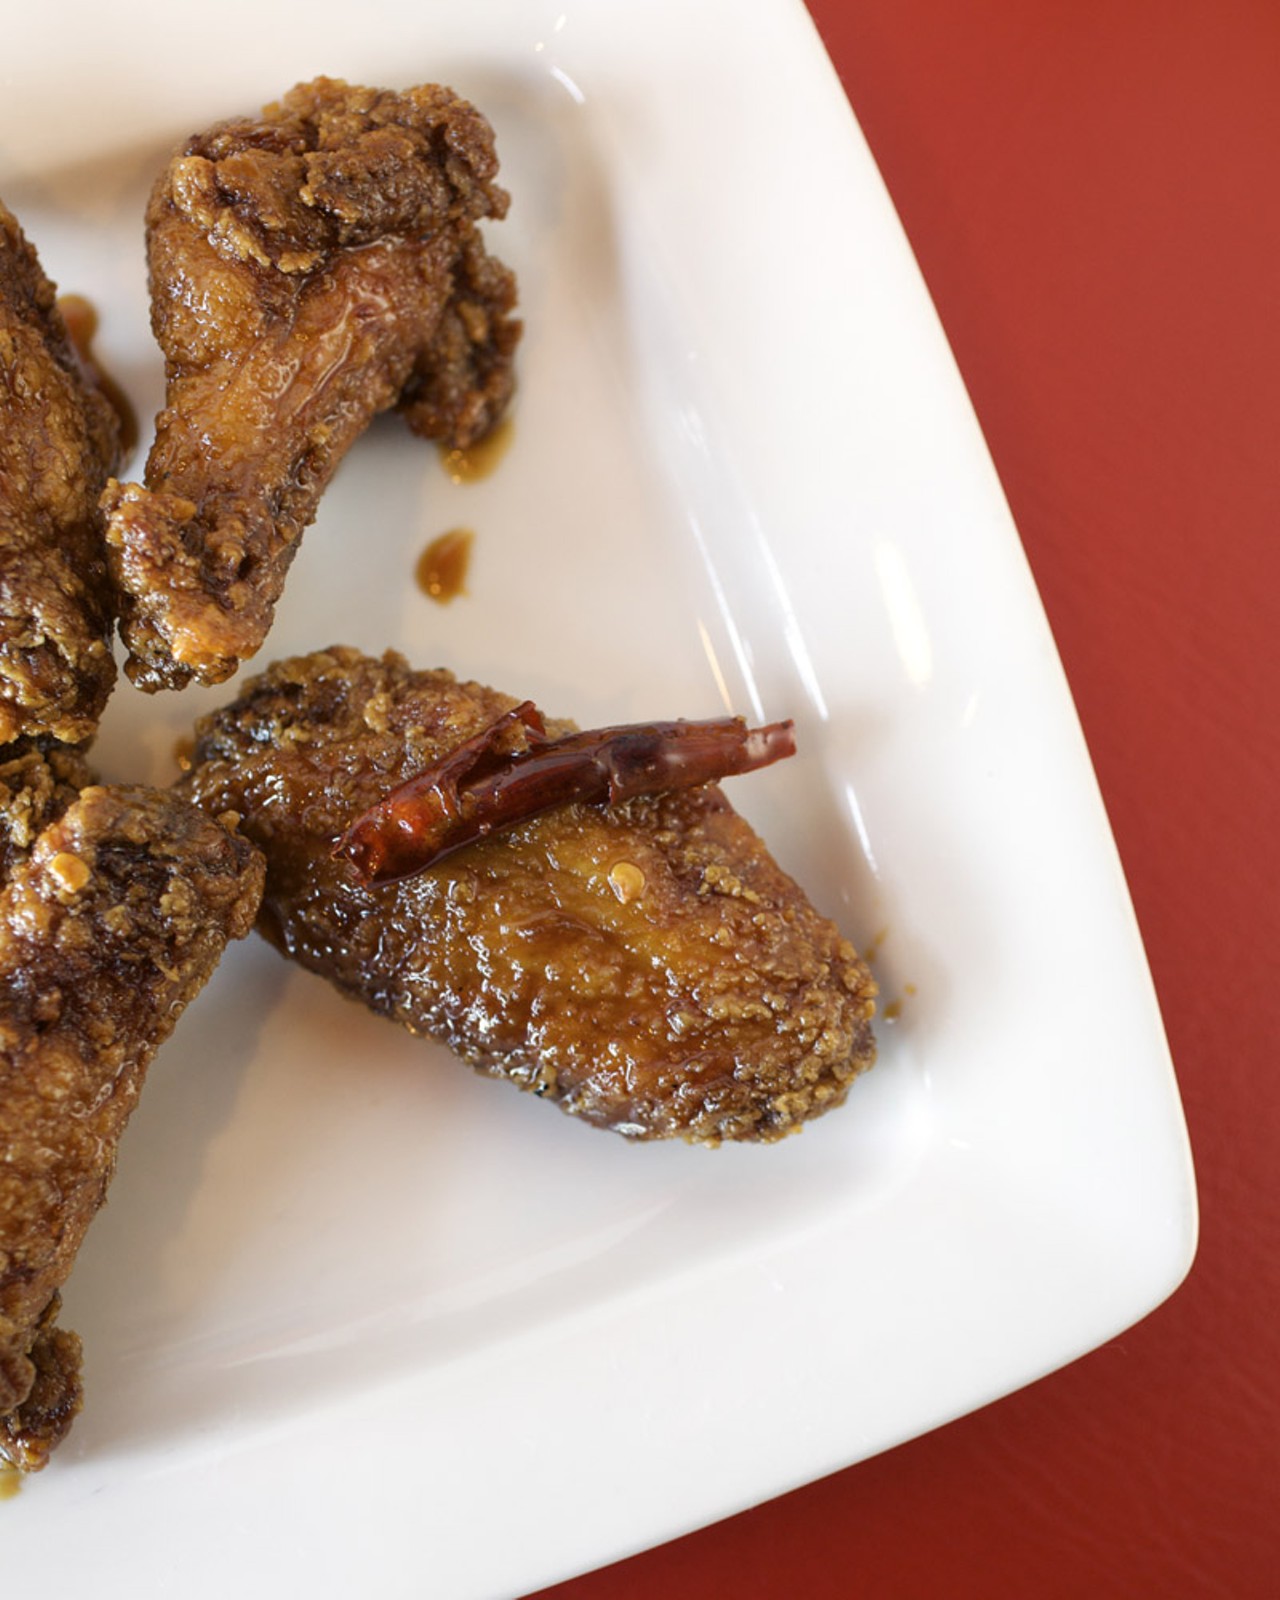 These wings are dressed in O's Original, a sauce that Heidi has been making at home for years. It is composed with the gentle heat of red chilies and caramelized brown sugar.